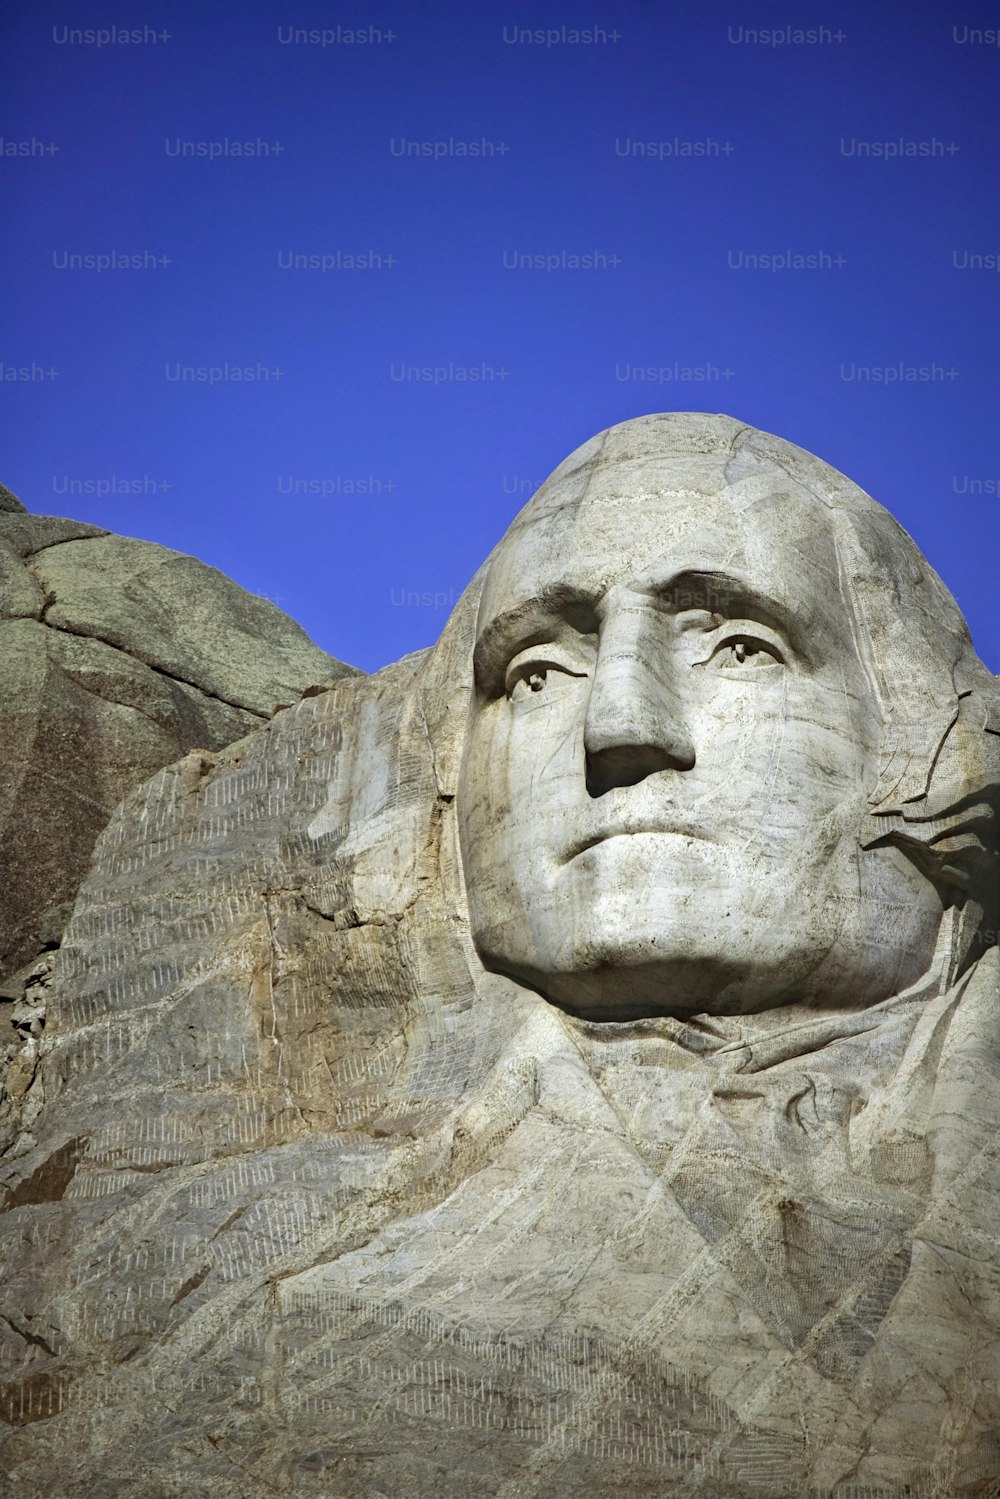 the face of abraham lincoln carved into the side of a mountain